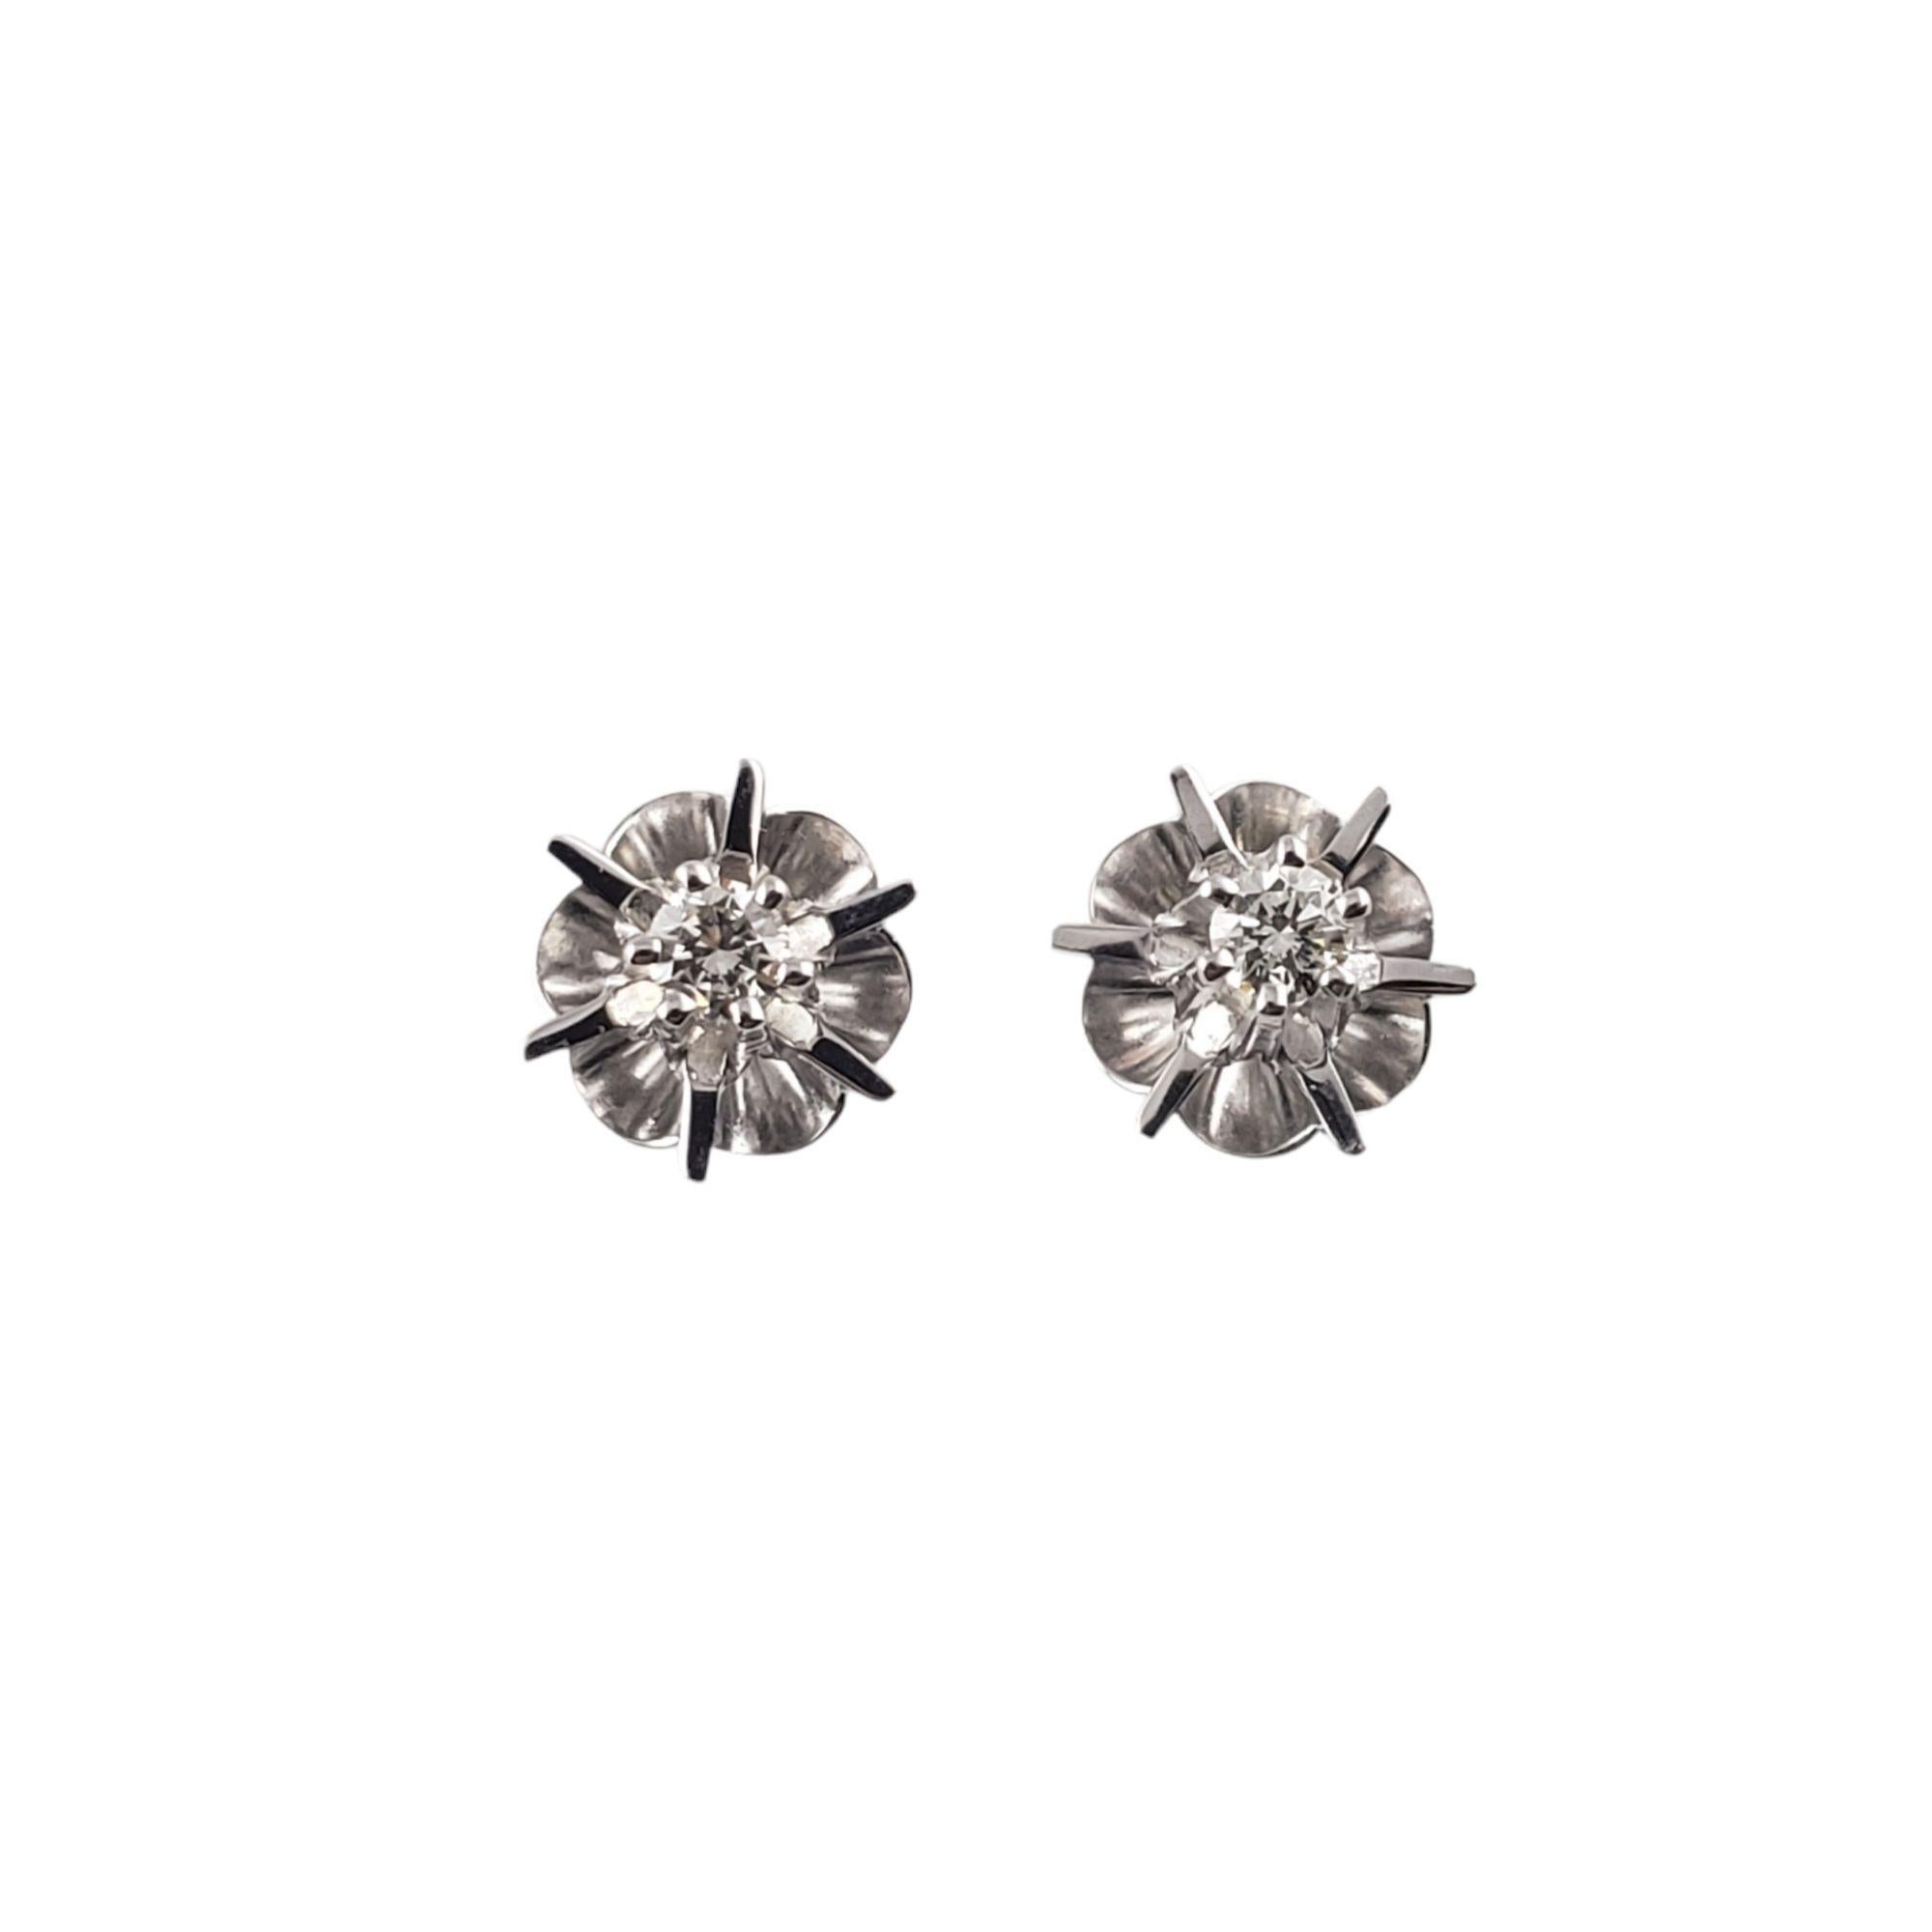 Vintage 14 Karat White Gold and Diamond Stud Earrings-

These sparkling earrings each feature one round brilliant cut diamond set in classic 14K white gold.  Push back closures.

Approximate diamond weight: .12 ct.

Diamond color: G

Diamond